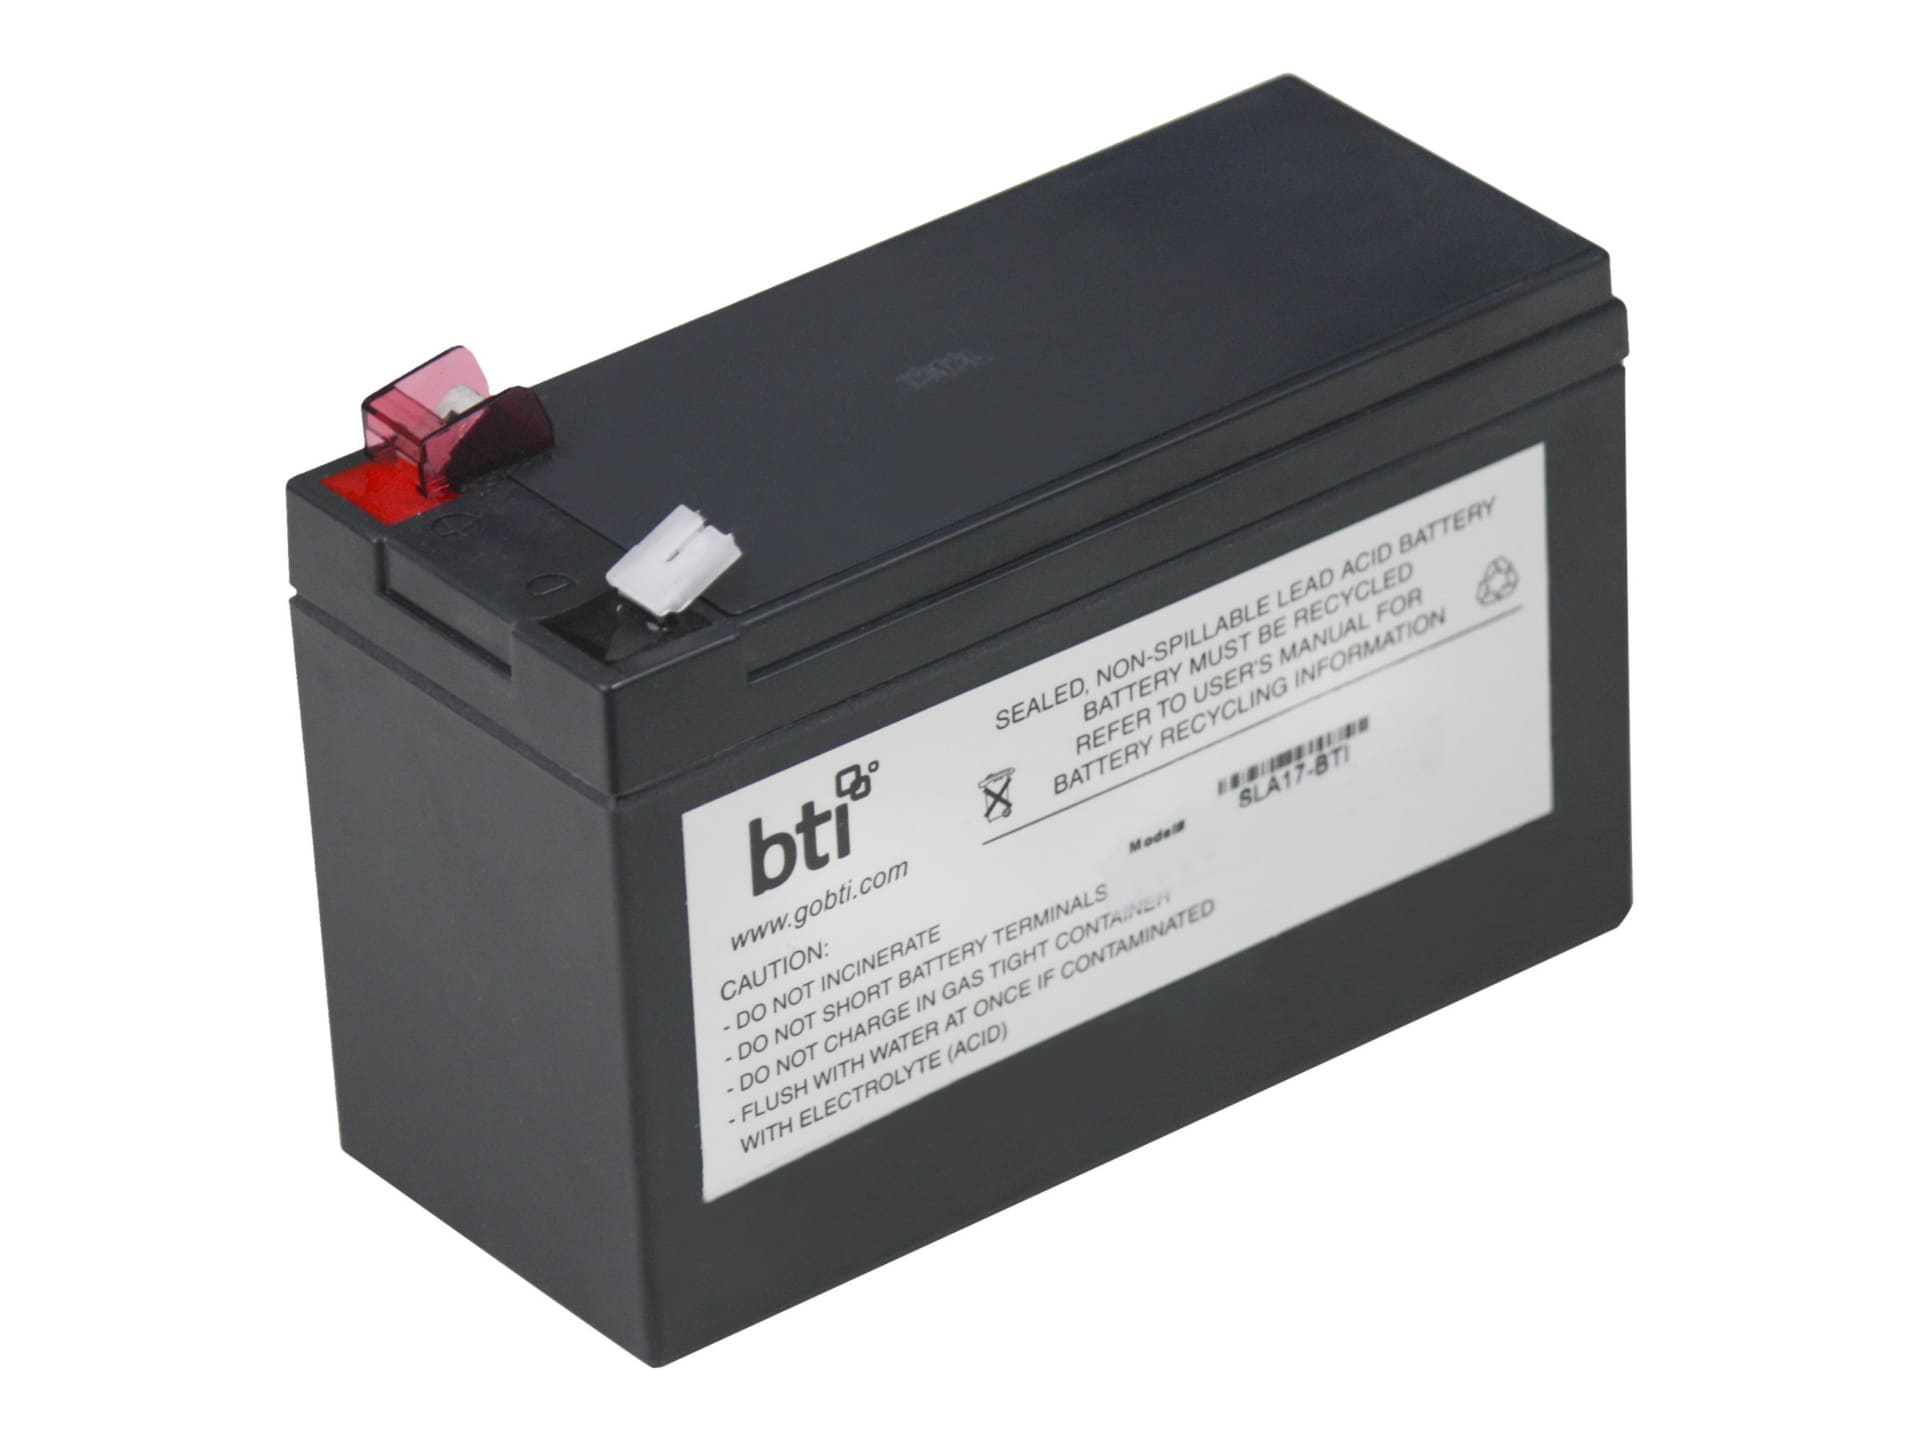 BTI Replacement Battery #17 for APC - UPS battery - Sealed Lead Acid (SLA)